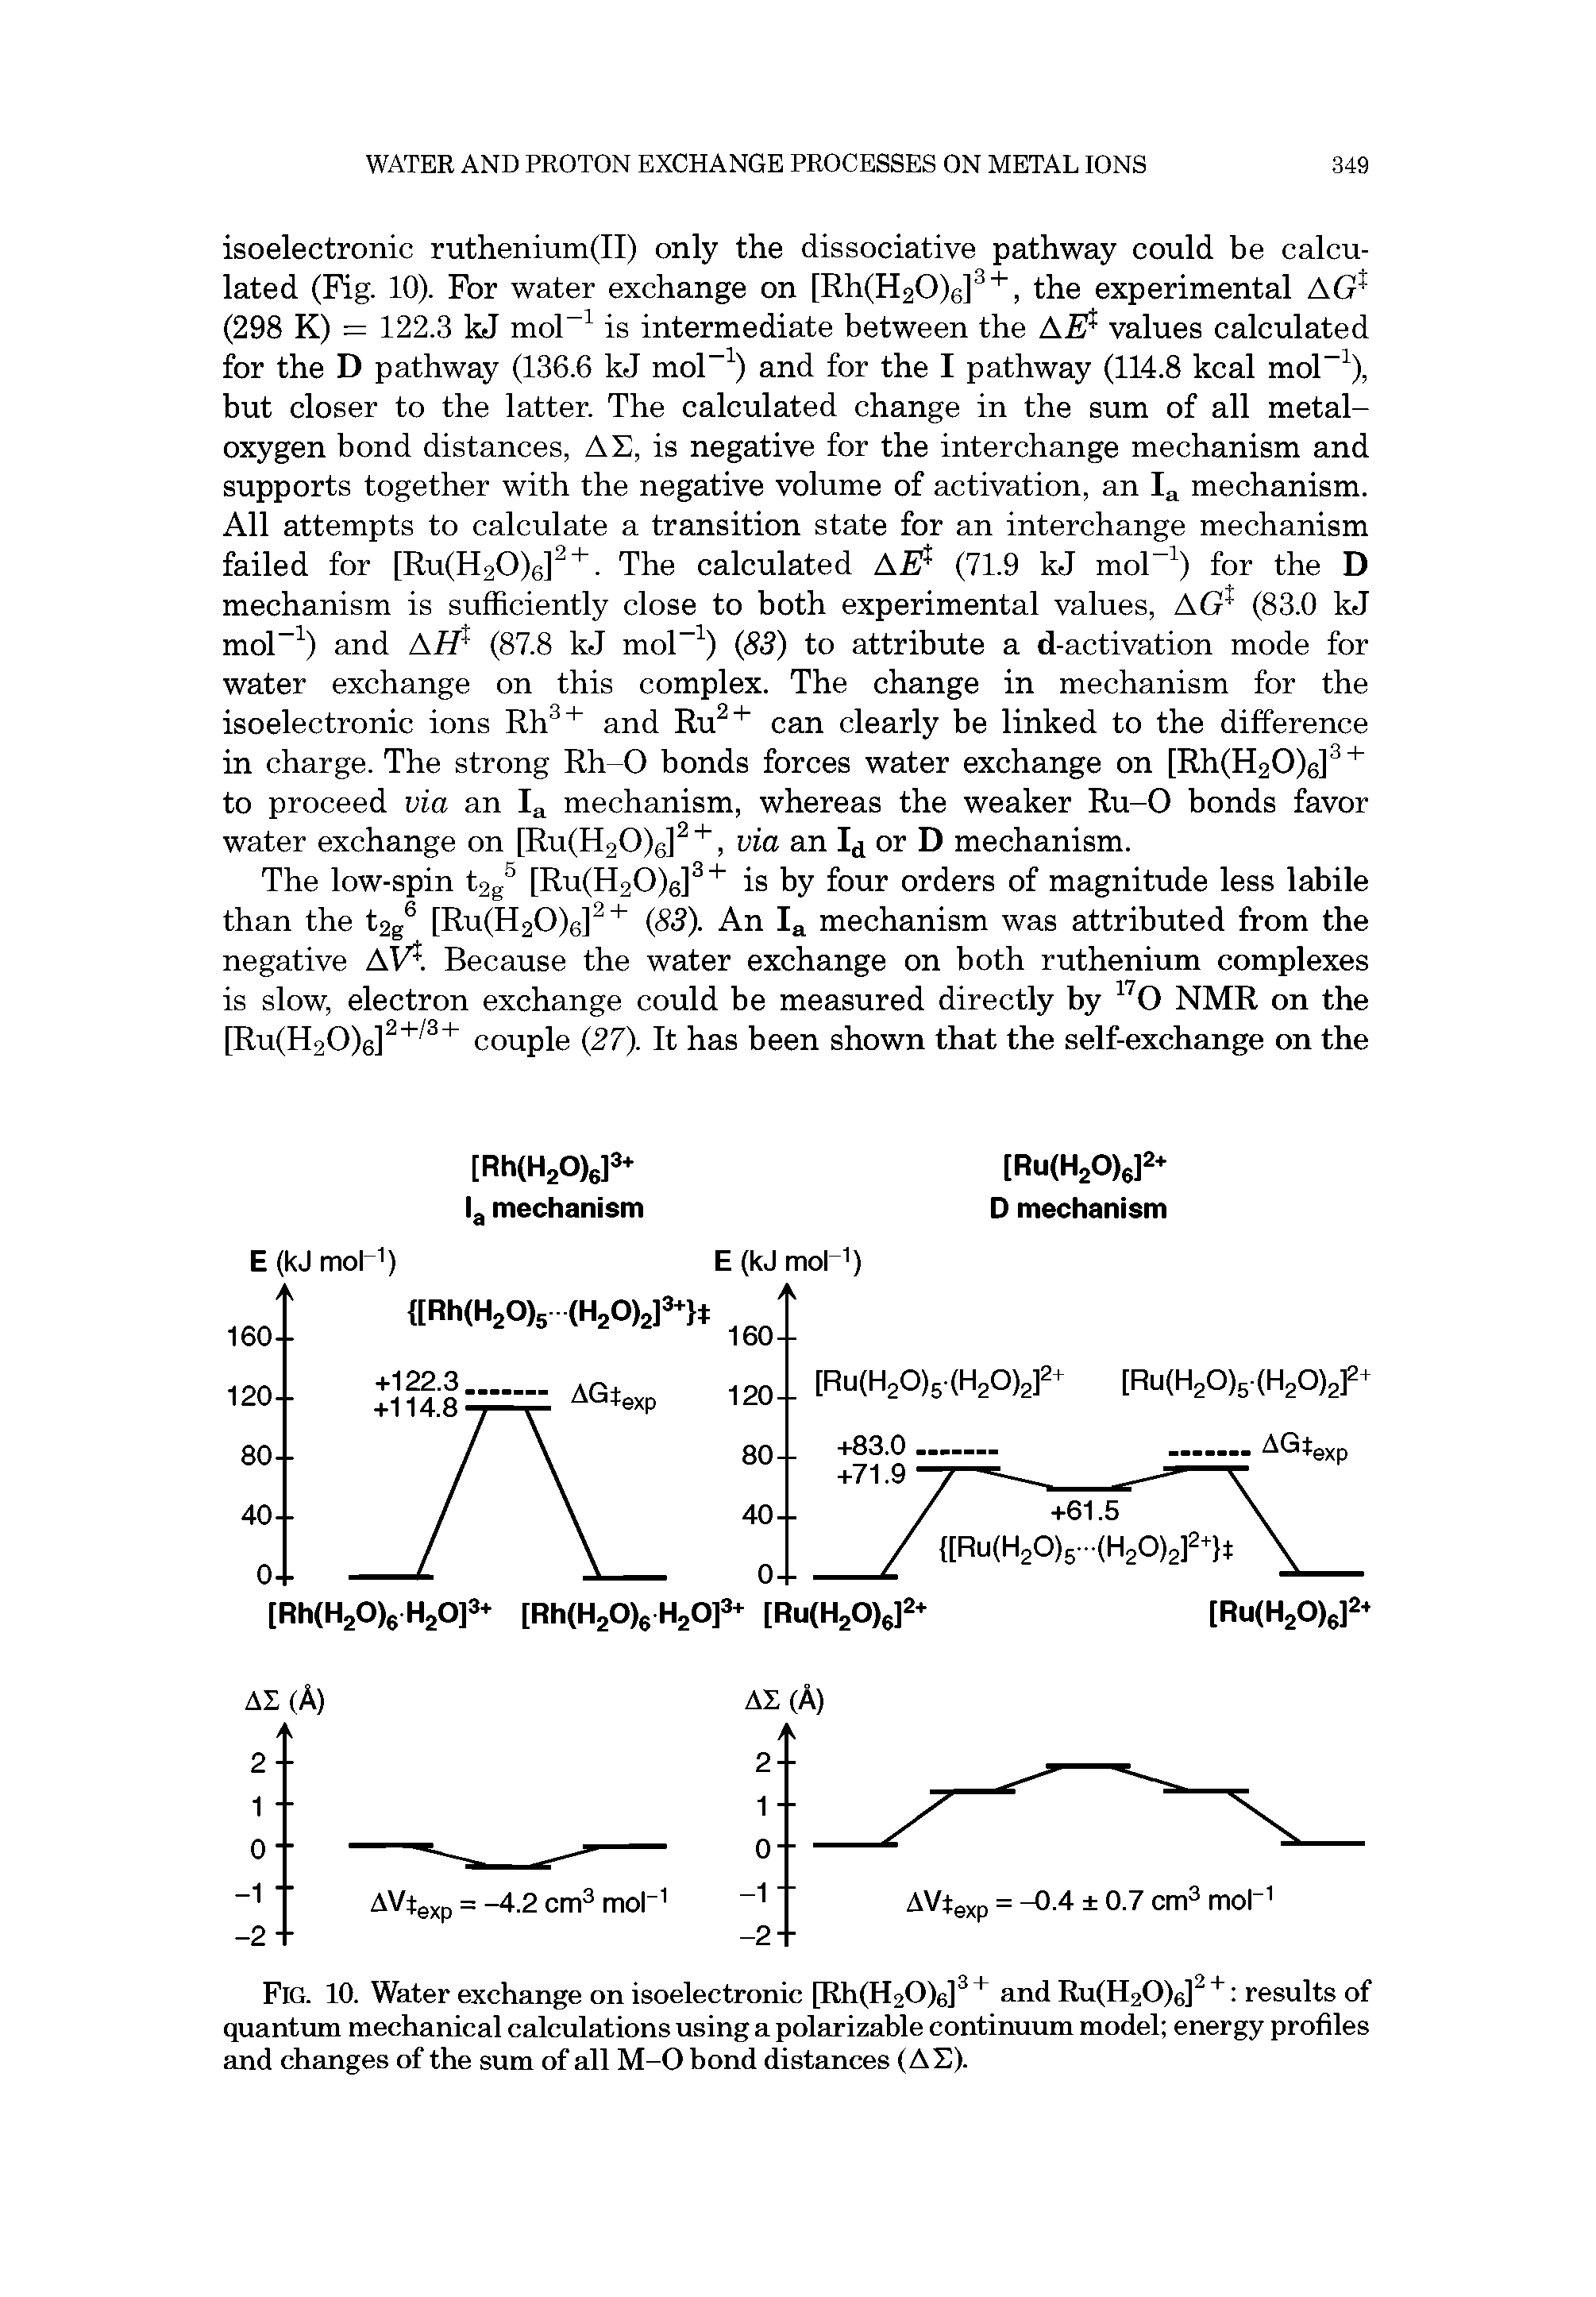 Fig. 10. Water exchange on isoelectronic [Rh(H20)6] and Ru(H20)e] results of quantum mechanical calculations using a polarizable continuum model energy profiles and changes of the sum of all M-0 bond distances (AE).